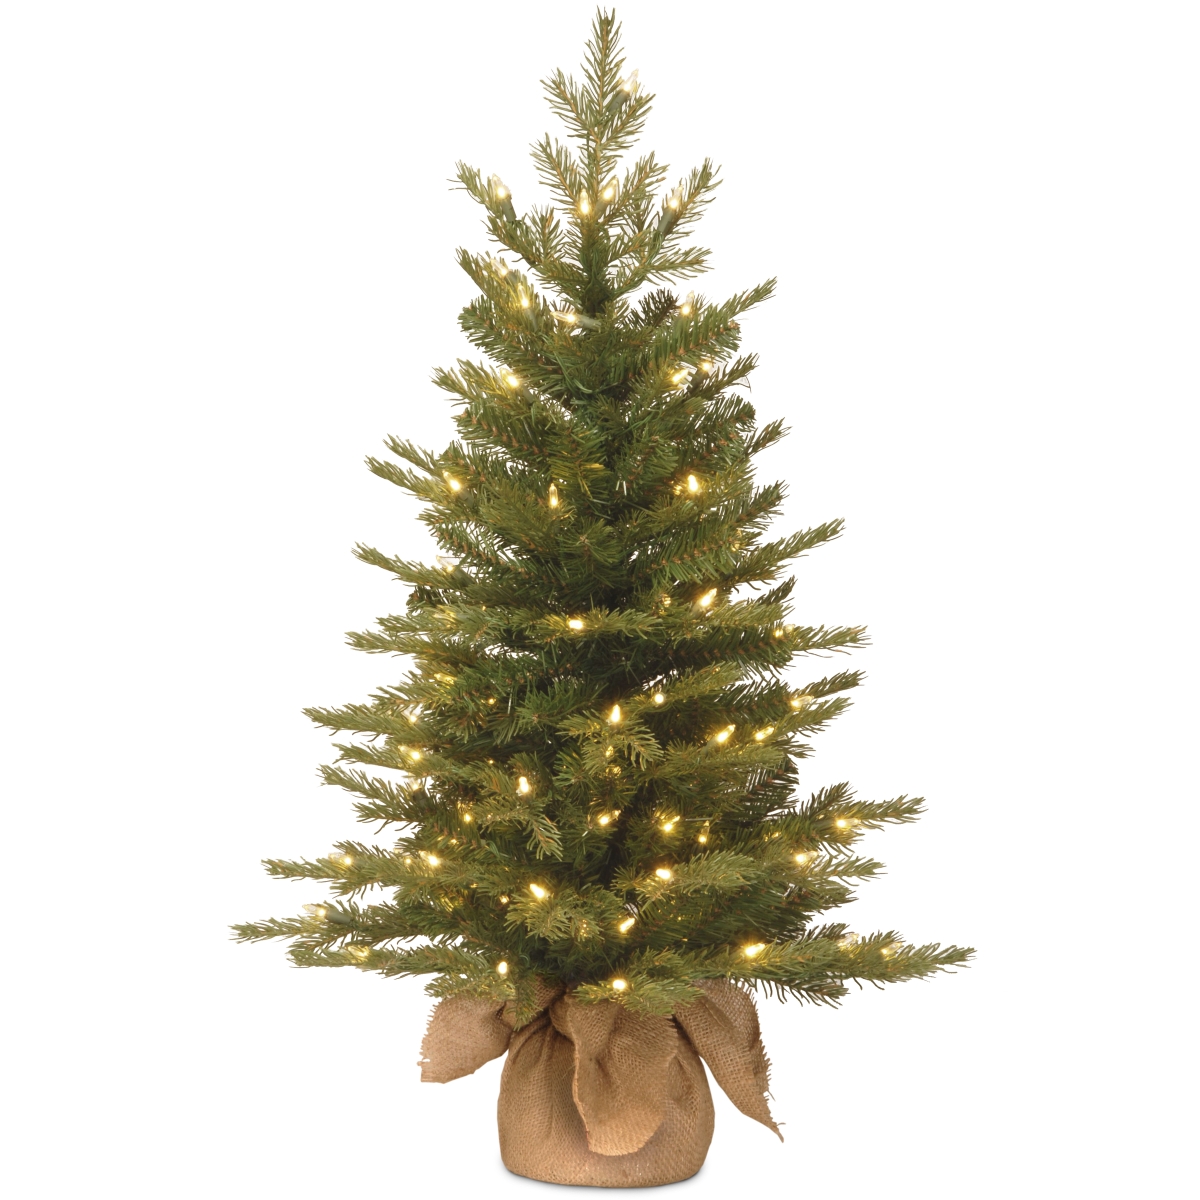 3 Ft. Feel Real Nordic Spruce Small Tree In Burlap With 100 Clear Lights